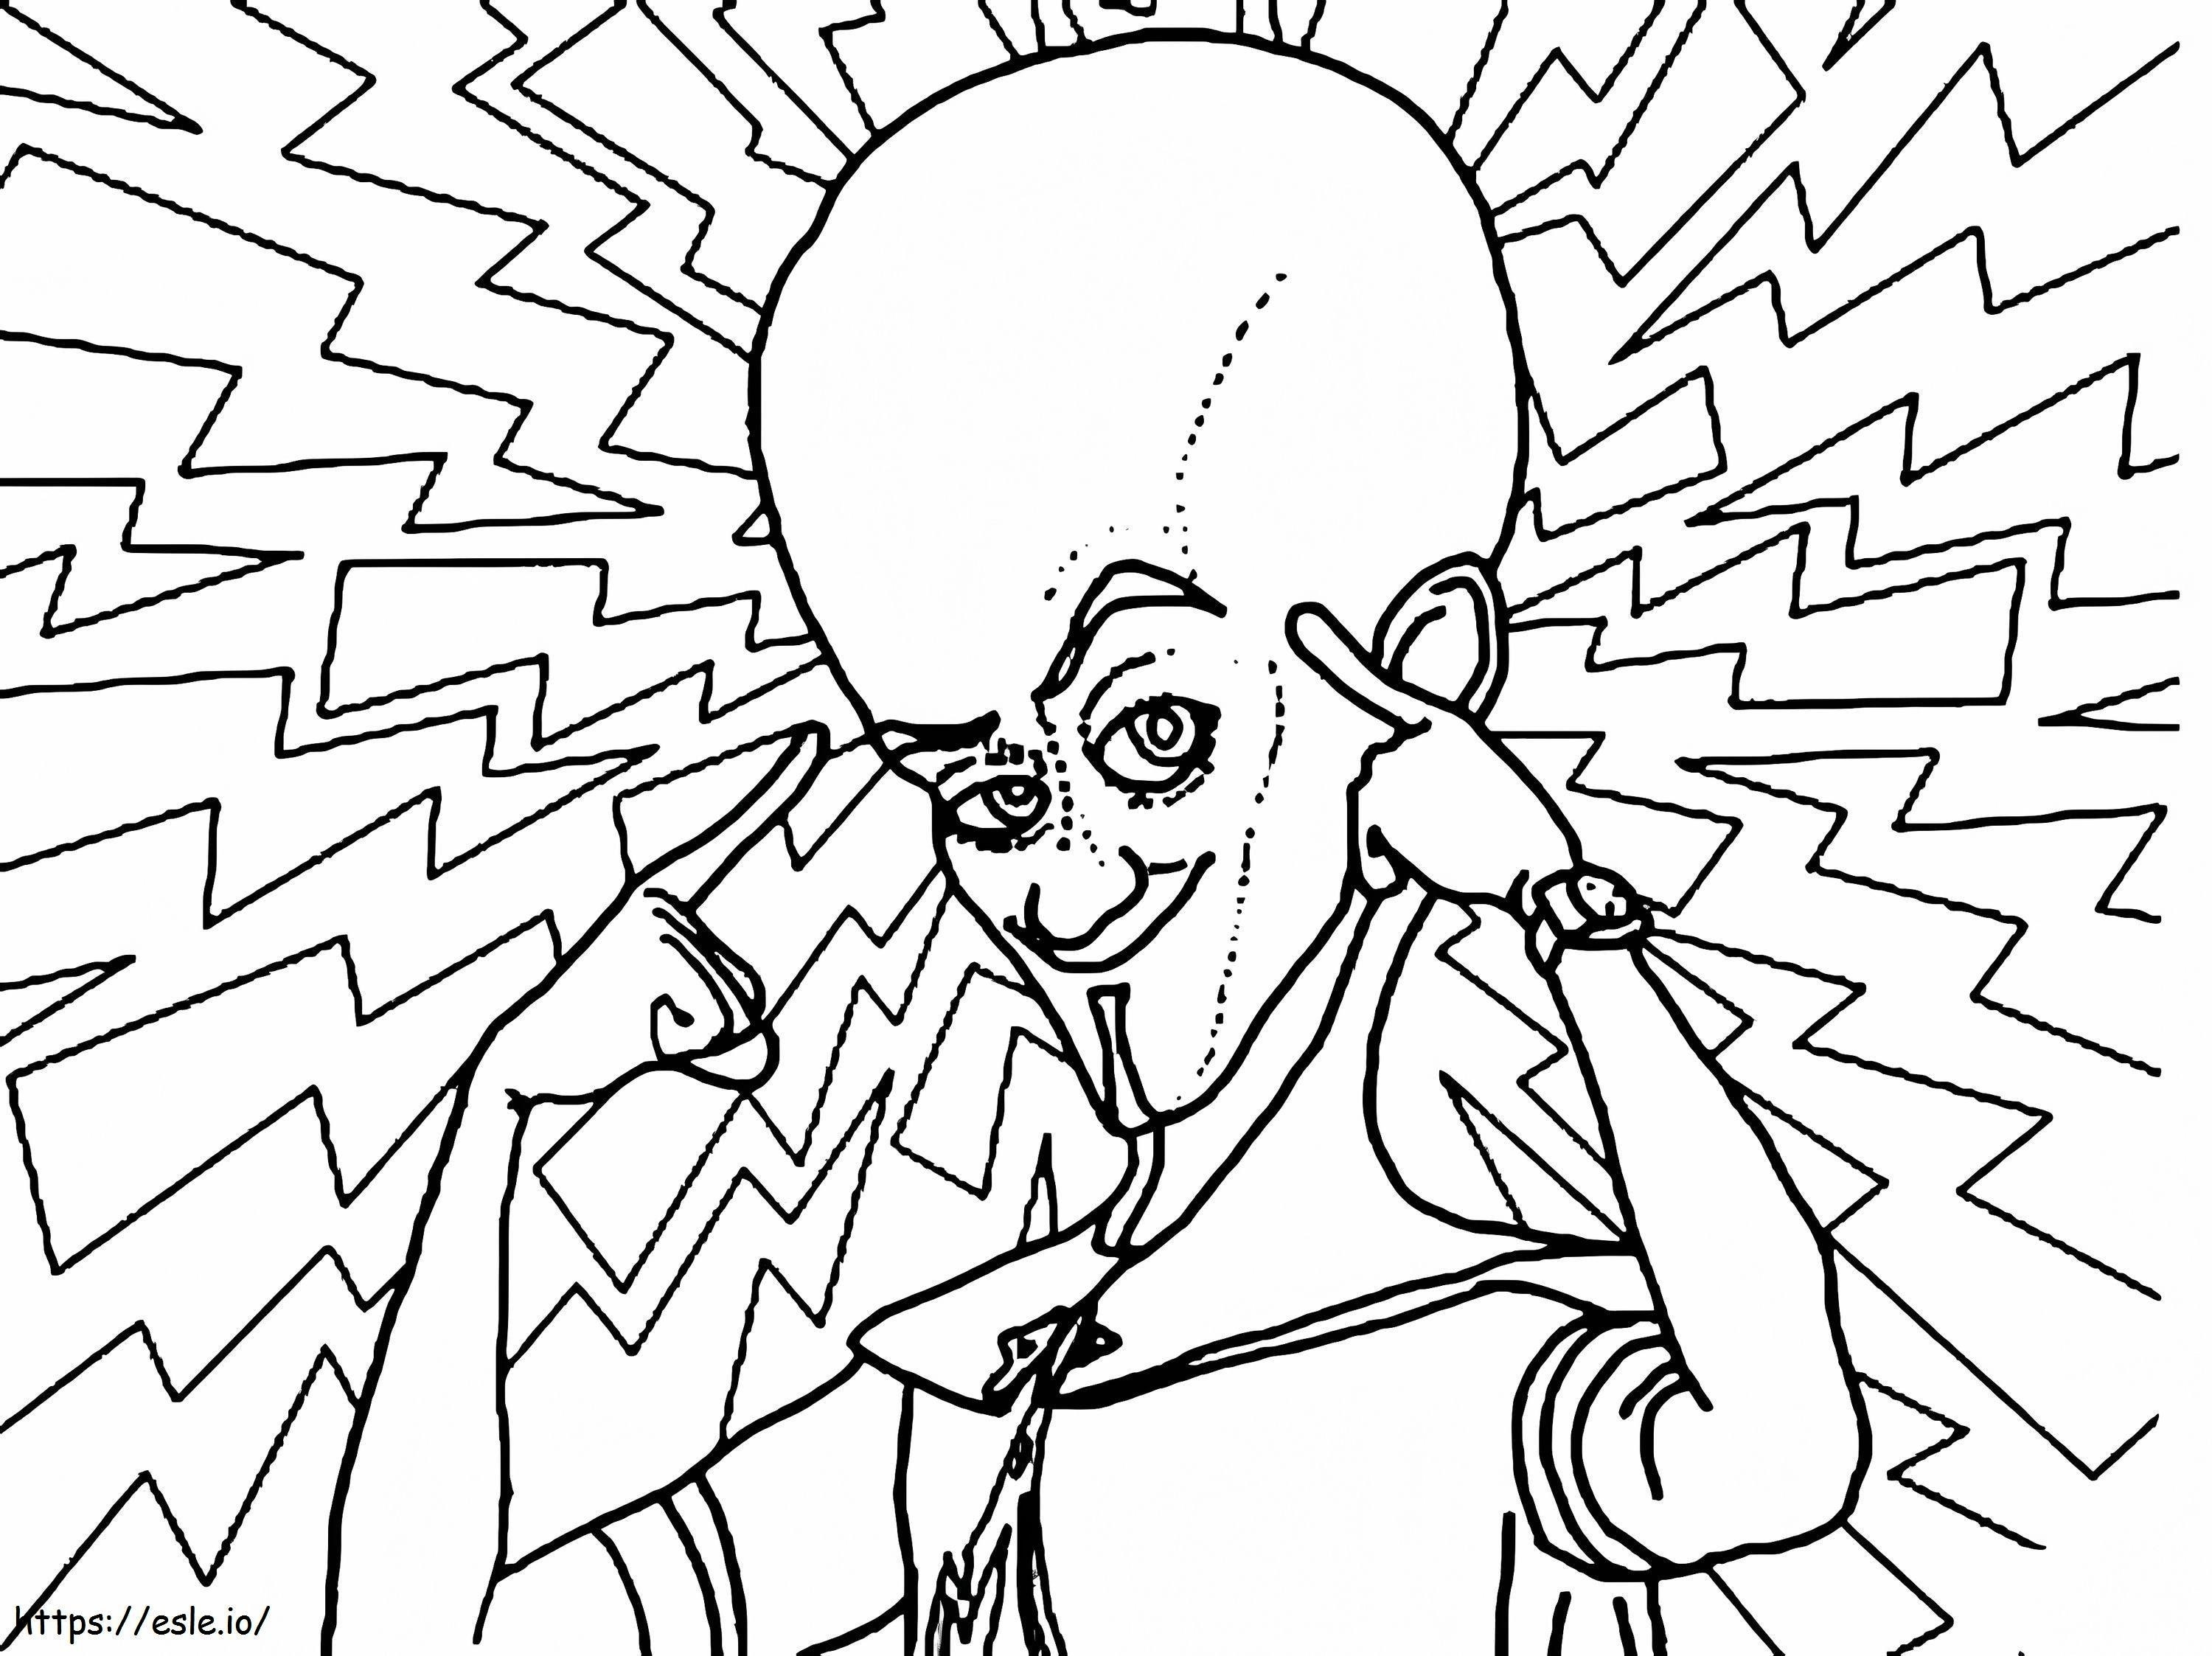 Megamind 1 coloring page